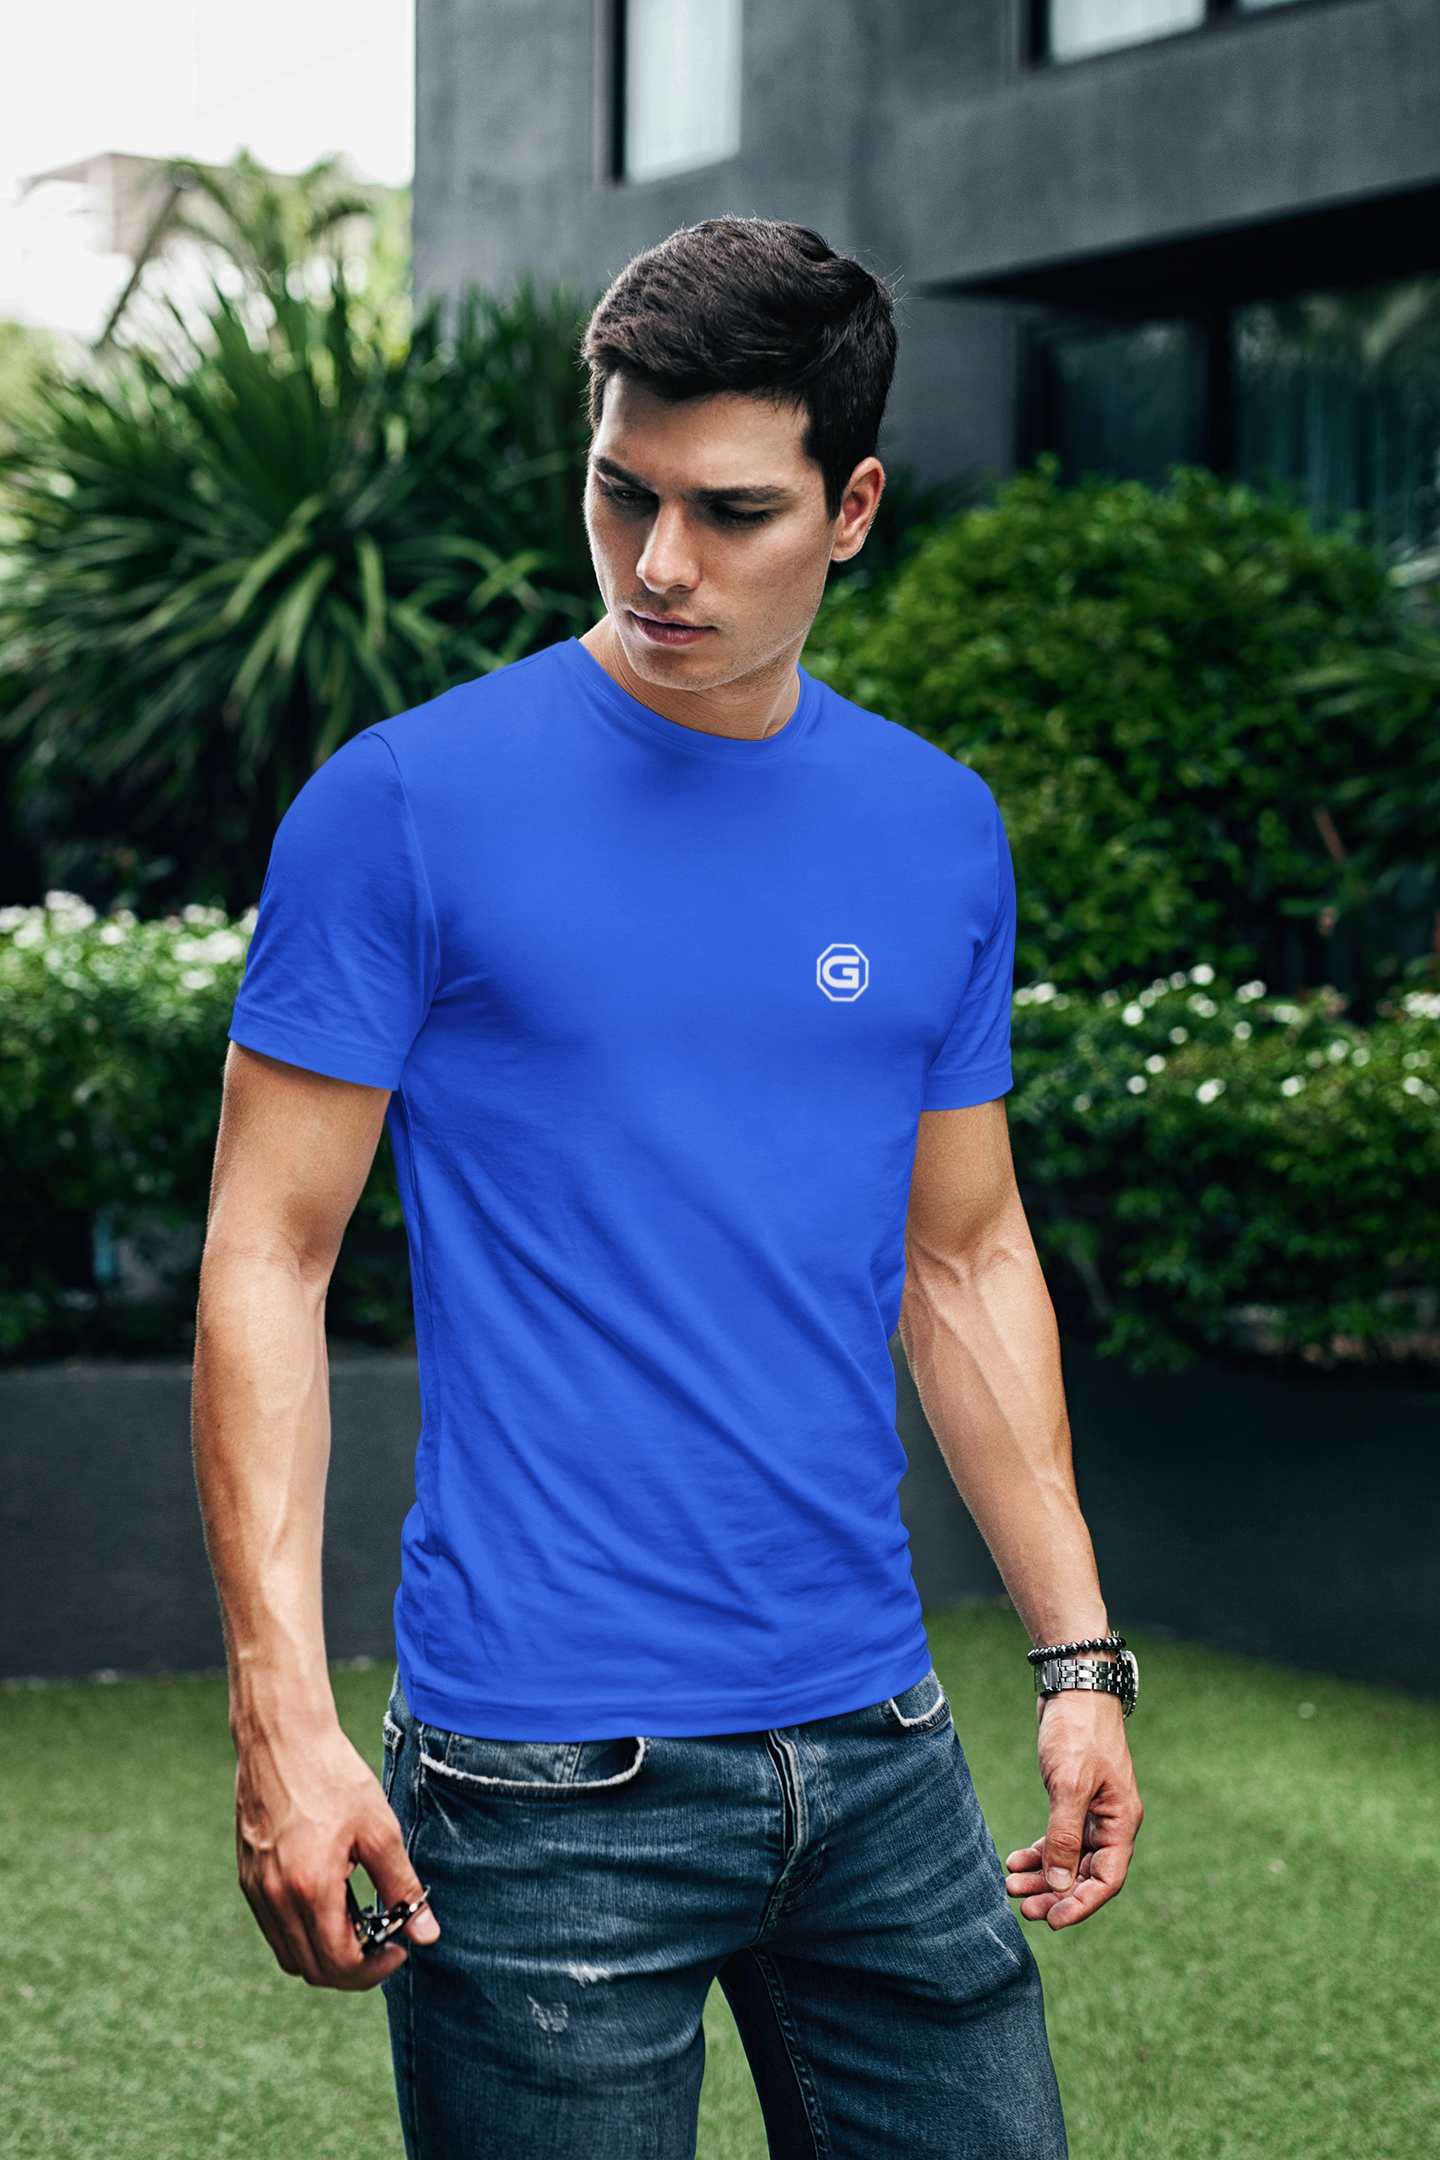 Stylish T shirts for men Active / Leisure Wear | Gymate small G logo blue